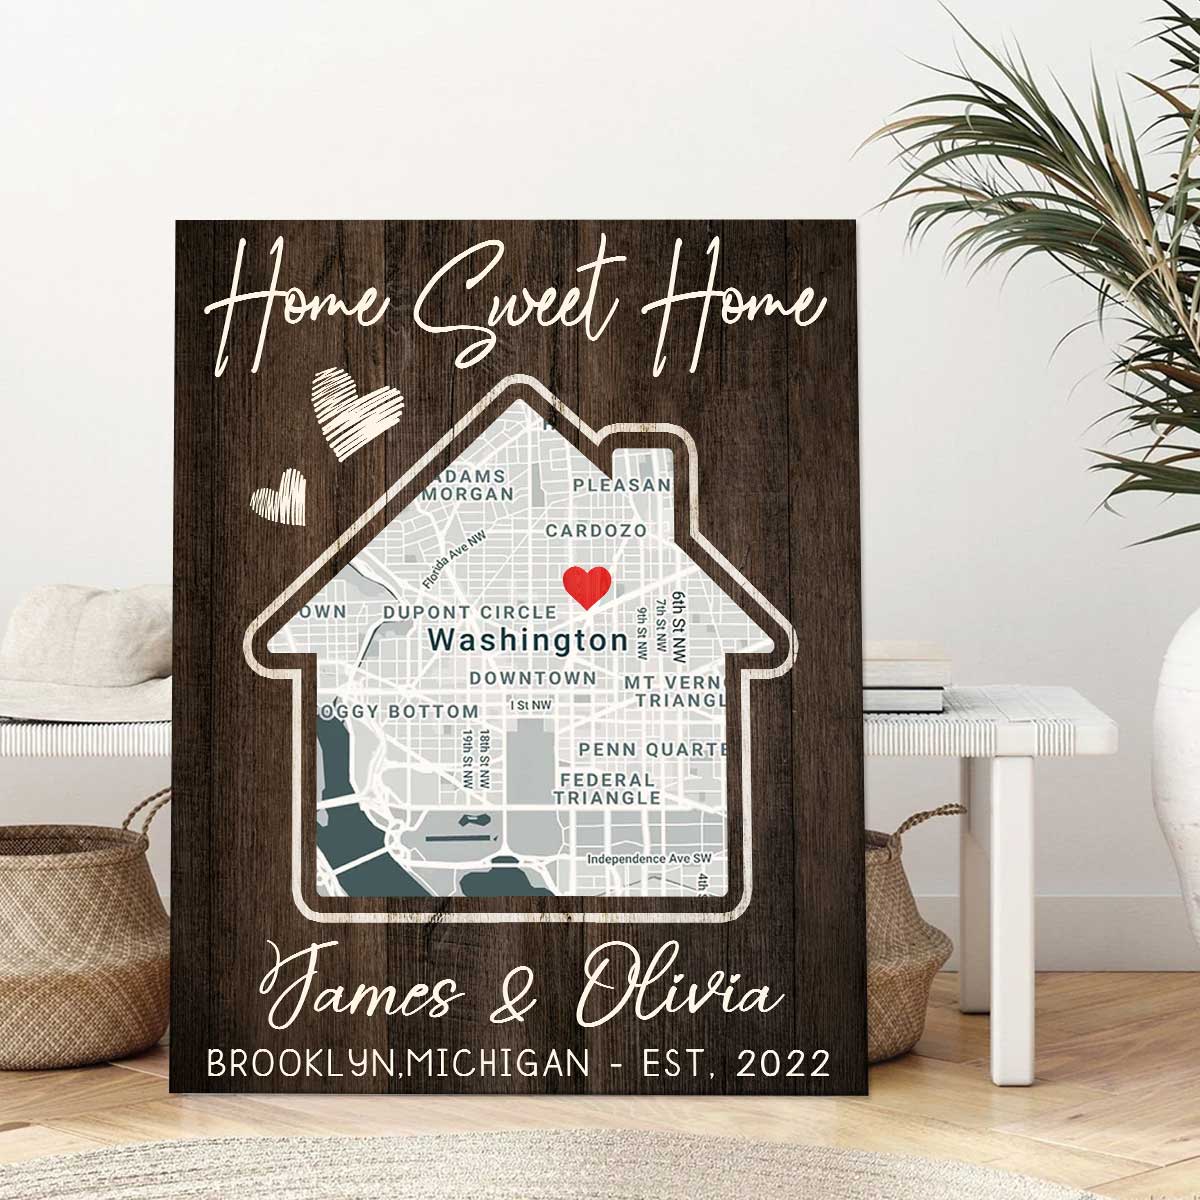 https://benicee.com/wp-content/uploads/2022/09/Best-Housewarming-Gifts-Gifts-for-New-Homeowners-Our-First-Home-Custom-Map-Print-New-House-Gifts-4.jpeg